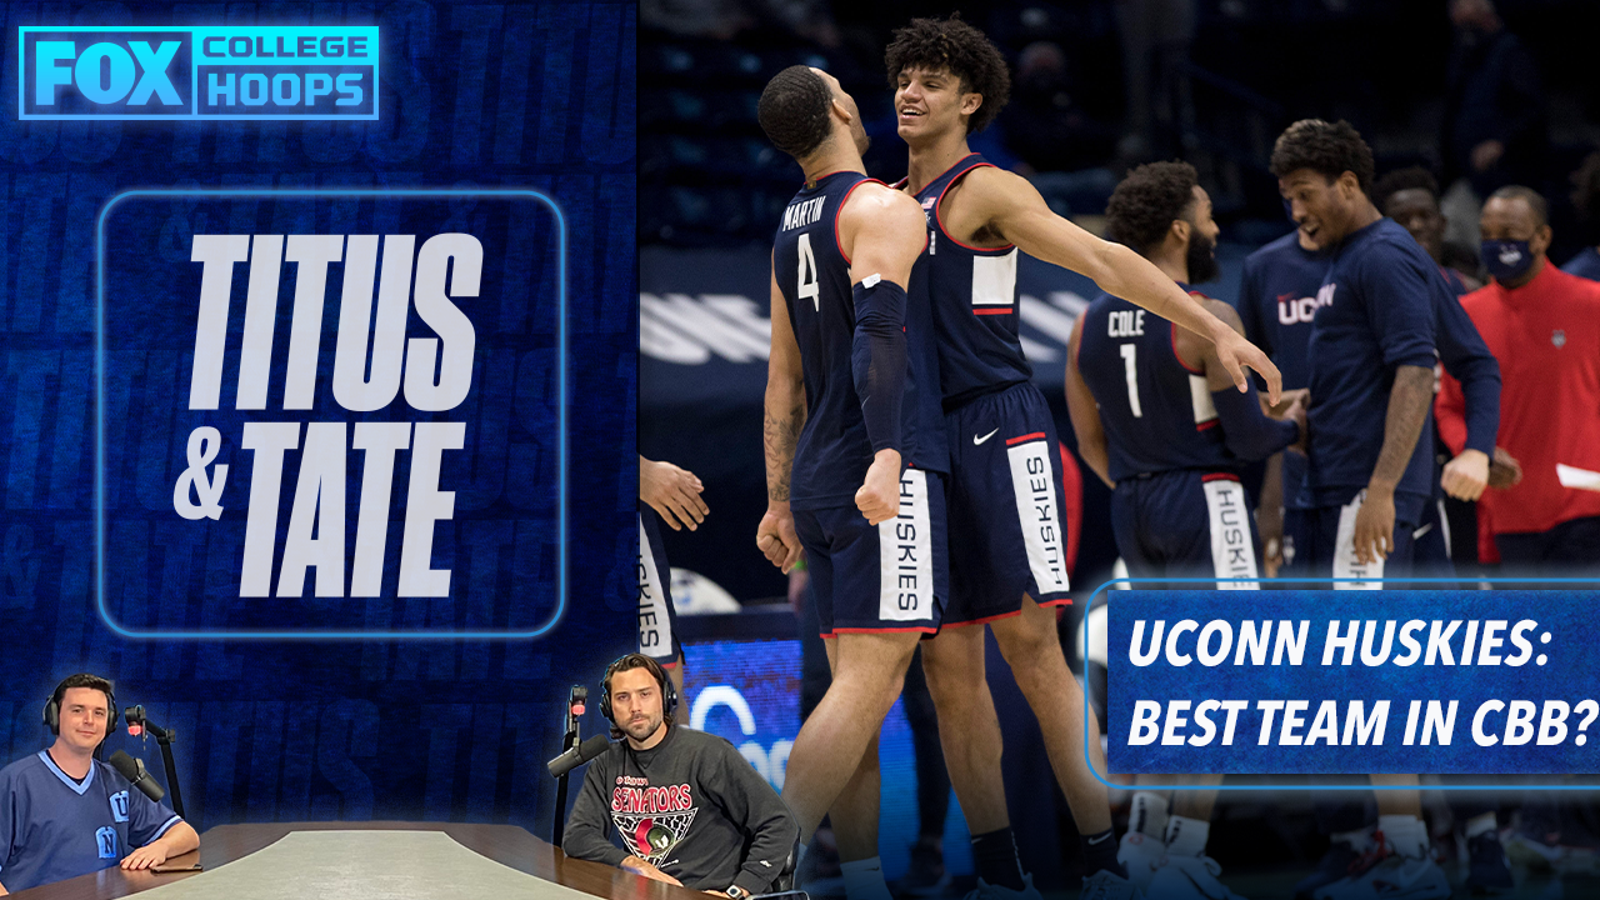 Is UConn the best team in college basketball?